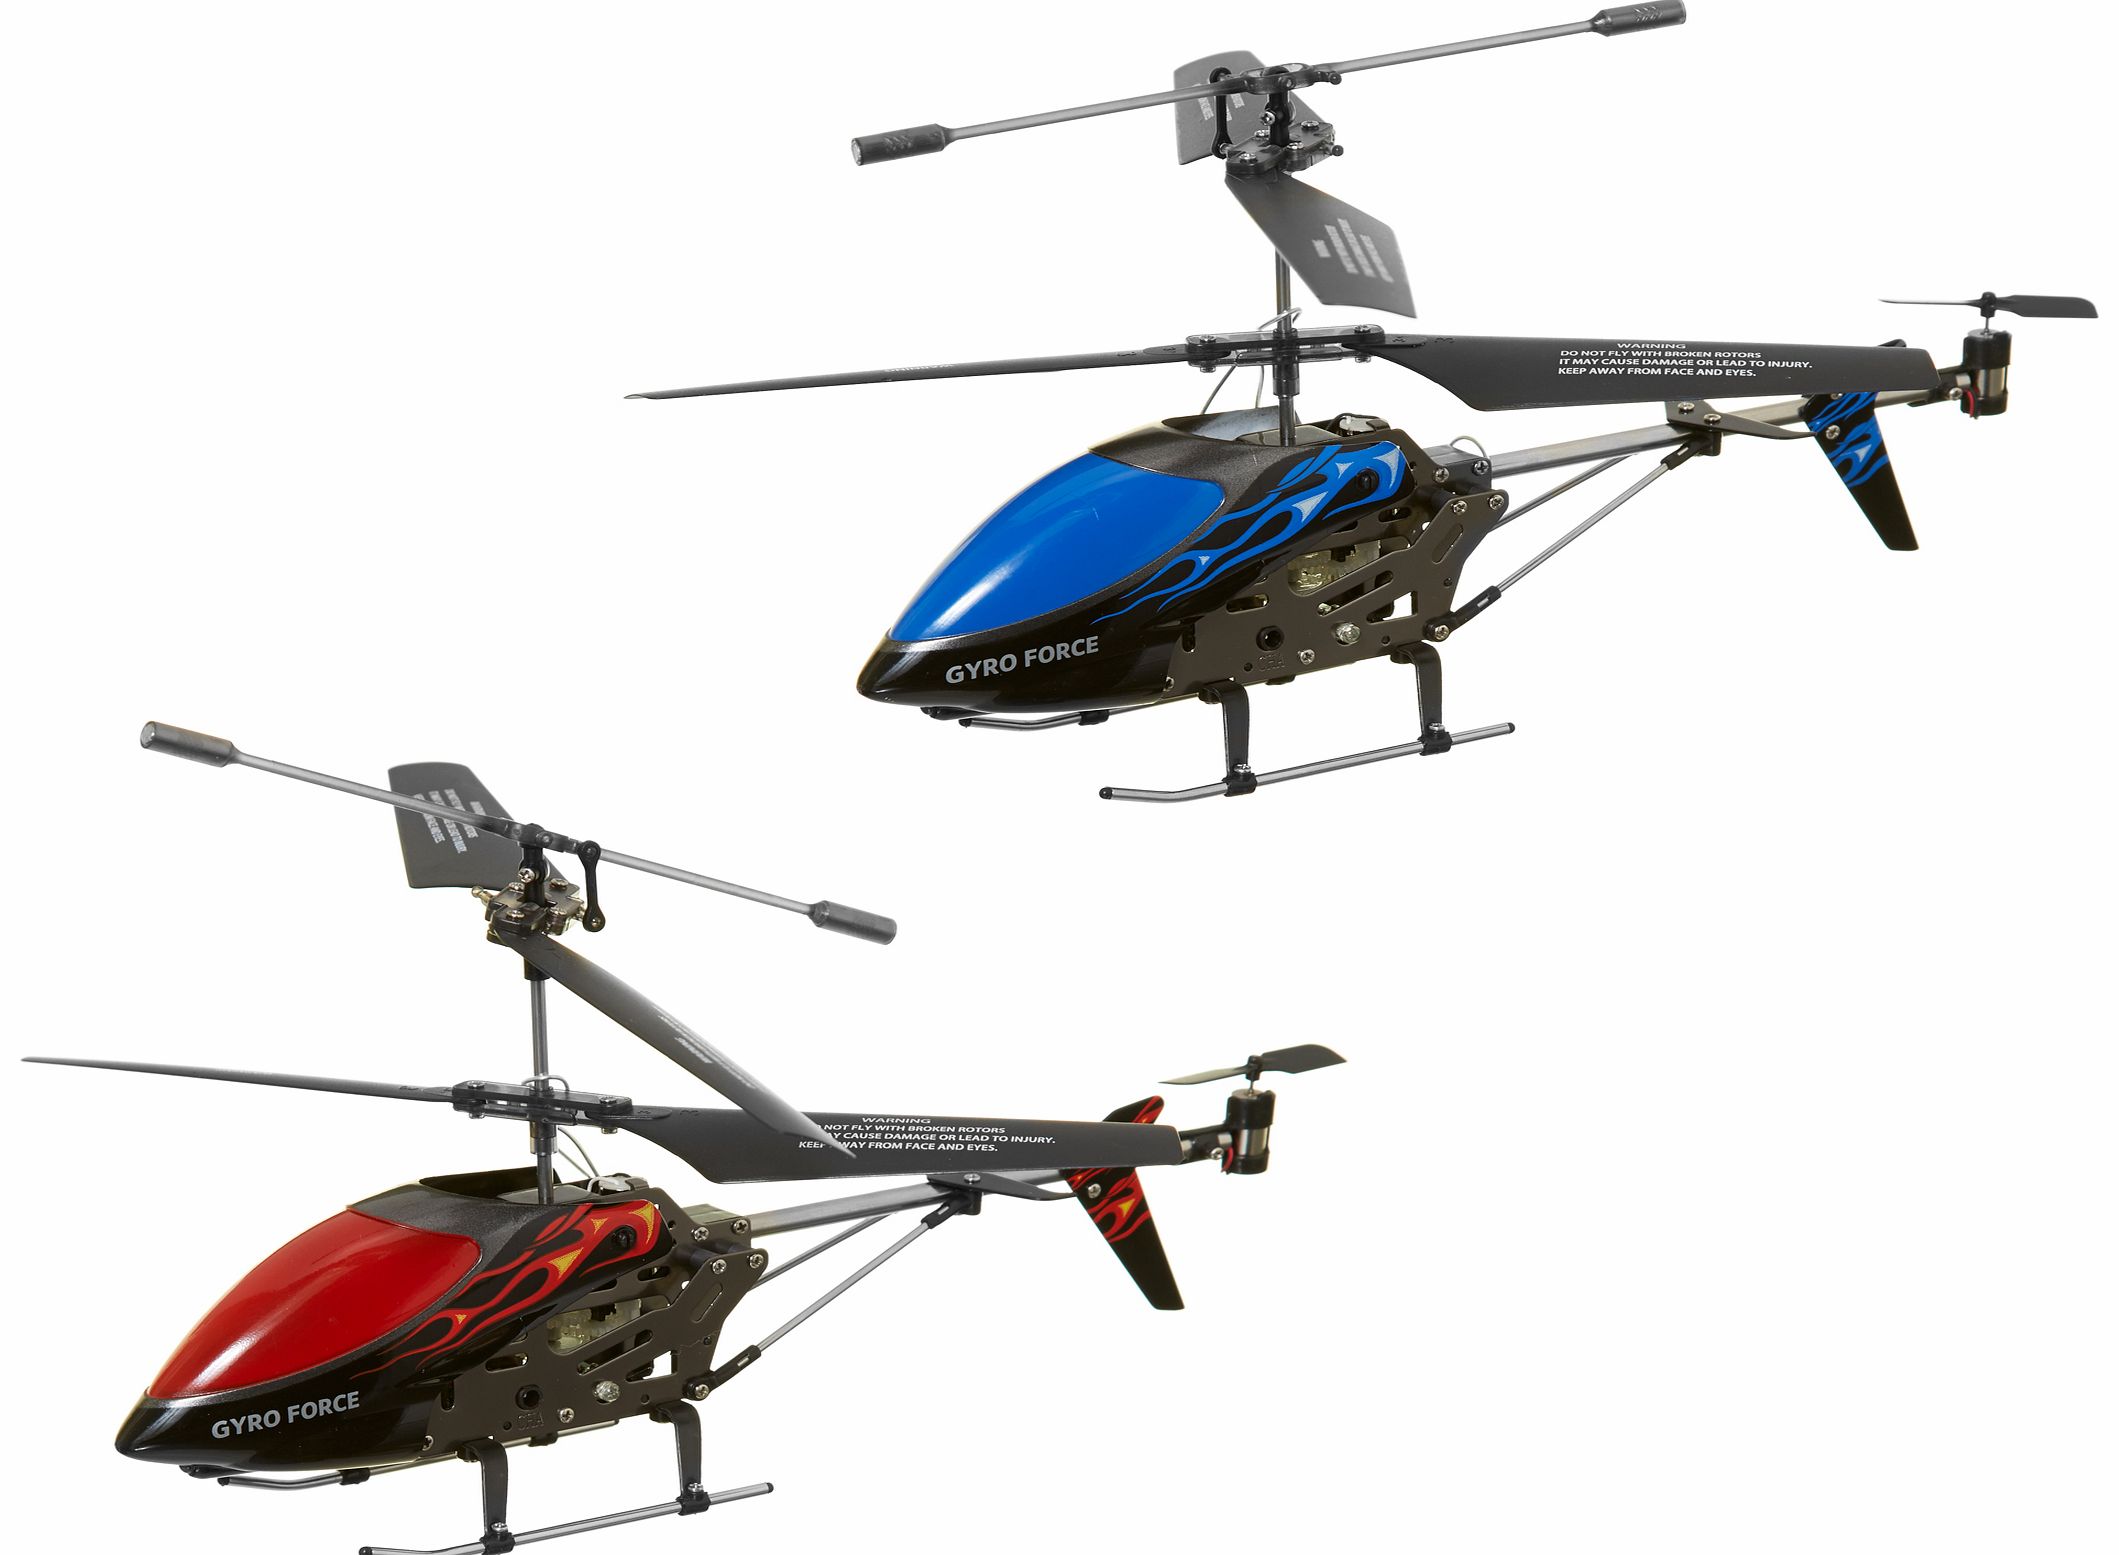 Indoor RC Gyro Force Helicopter